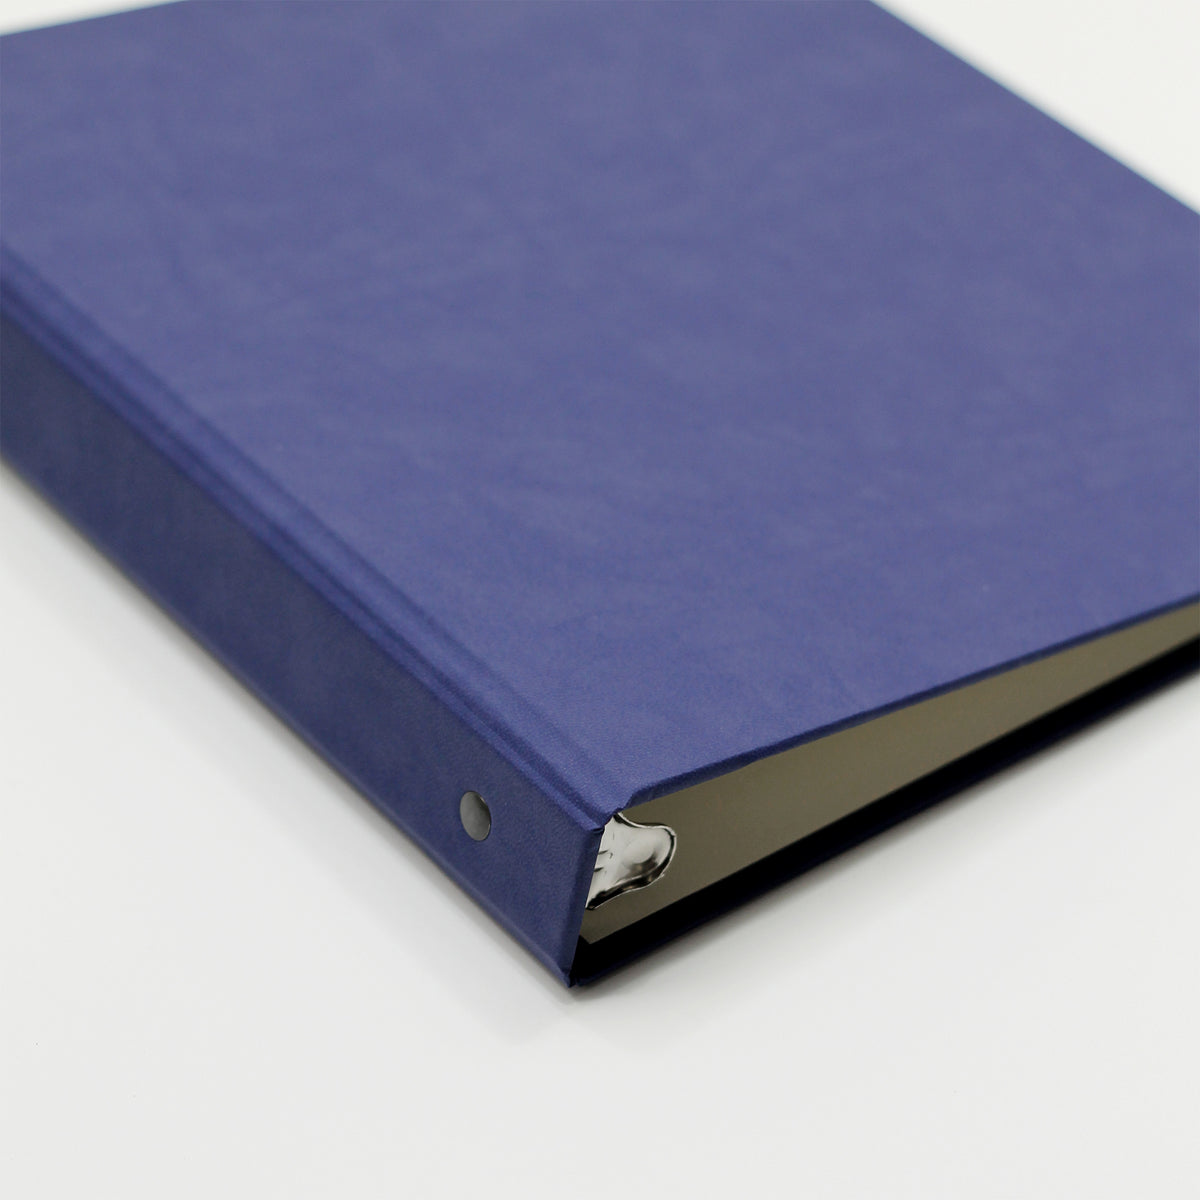 Large Postcard Album with Indigo Vegan Leather Cover | Select Sleeves for 4x6 or 5x7 Postcards